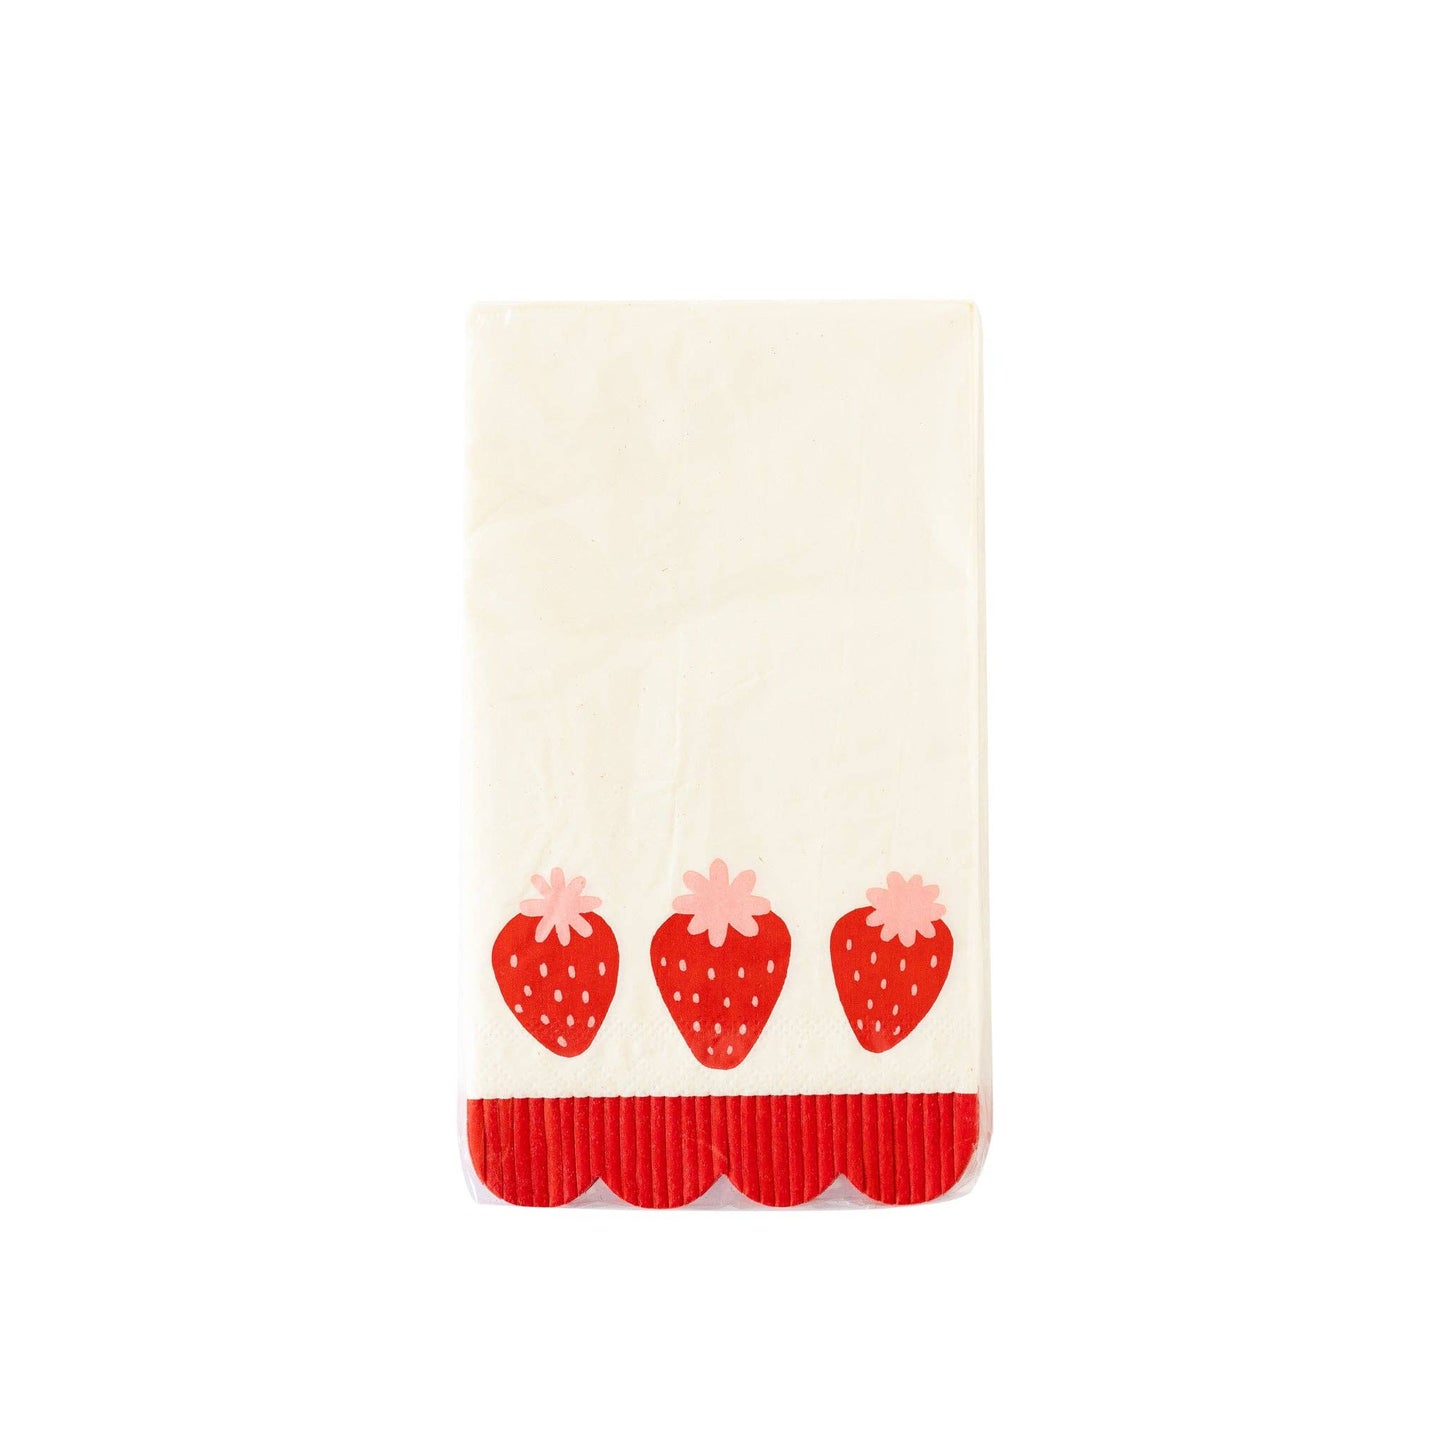 Berry Fringe Scallop Guest Towel